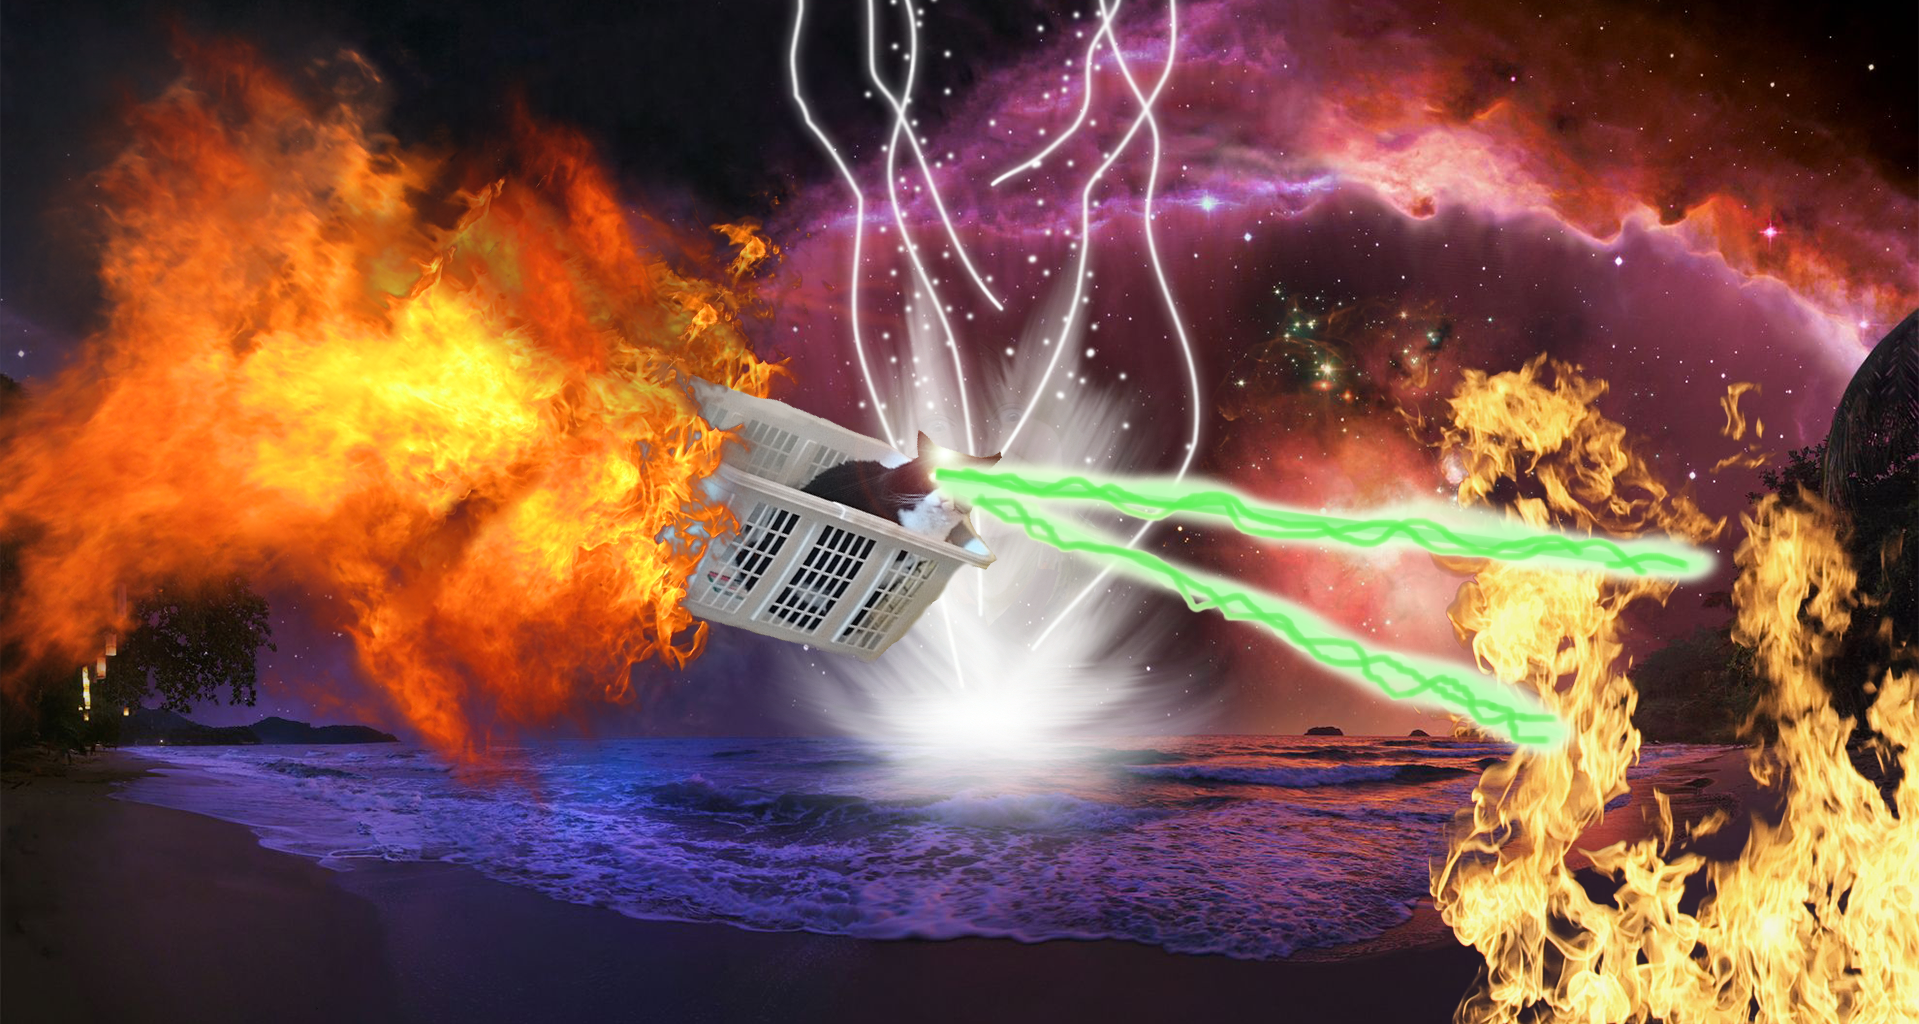 Cat Explosion Space Laser (the Wallpaper)